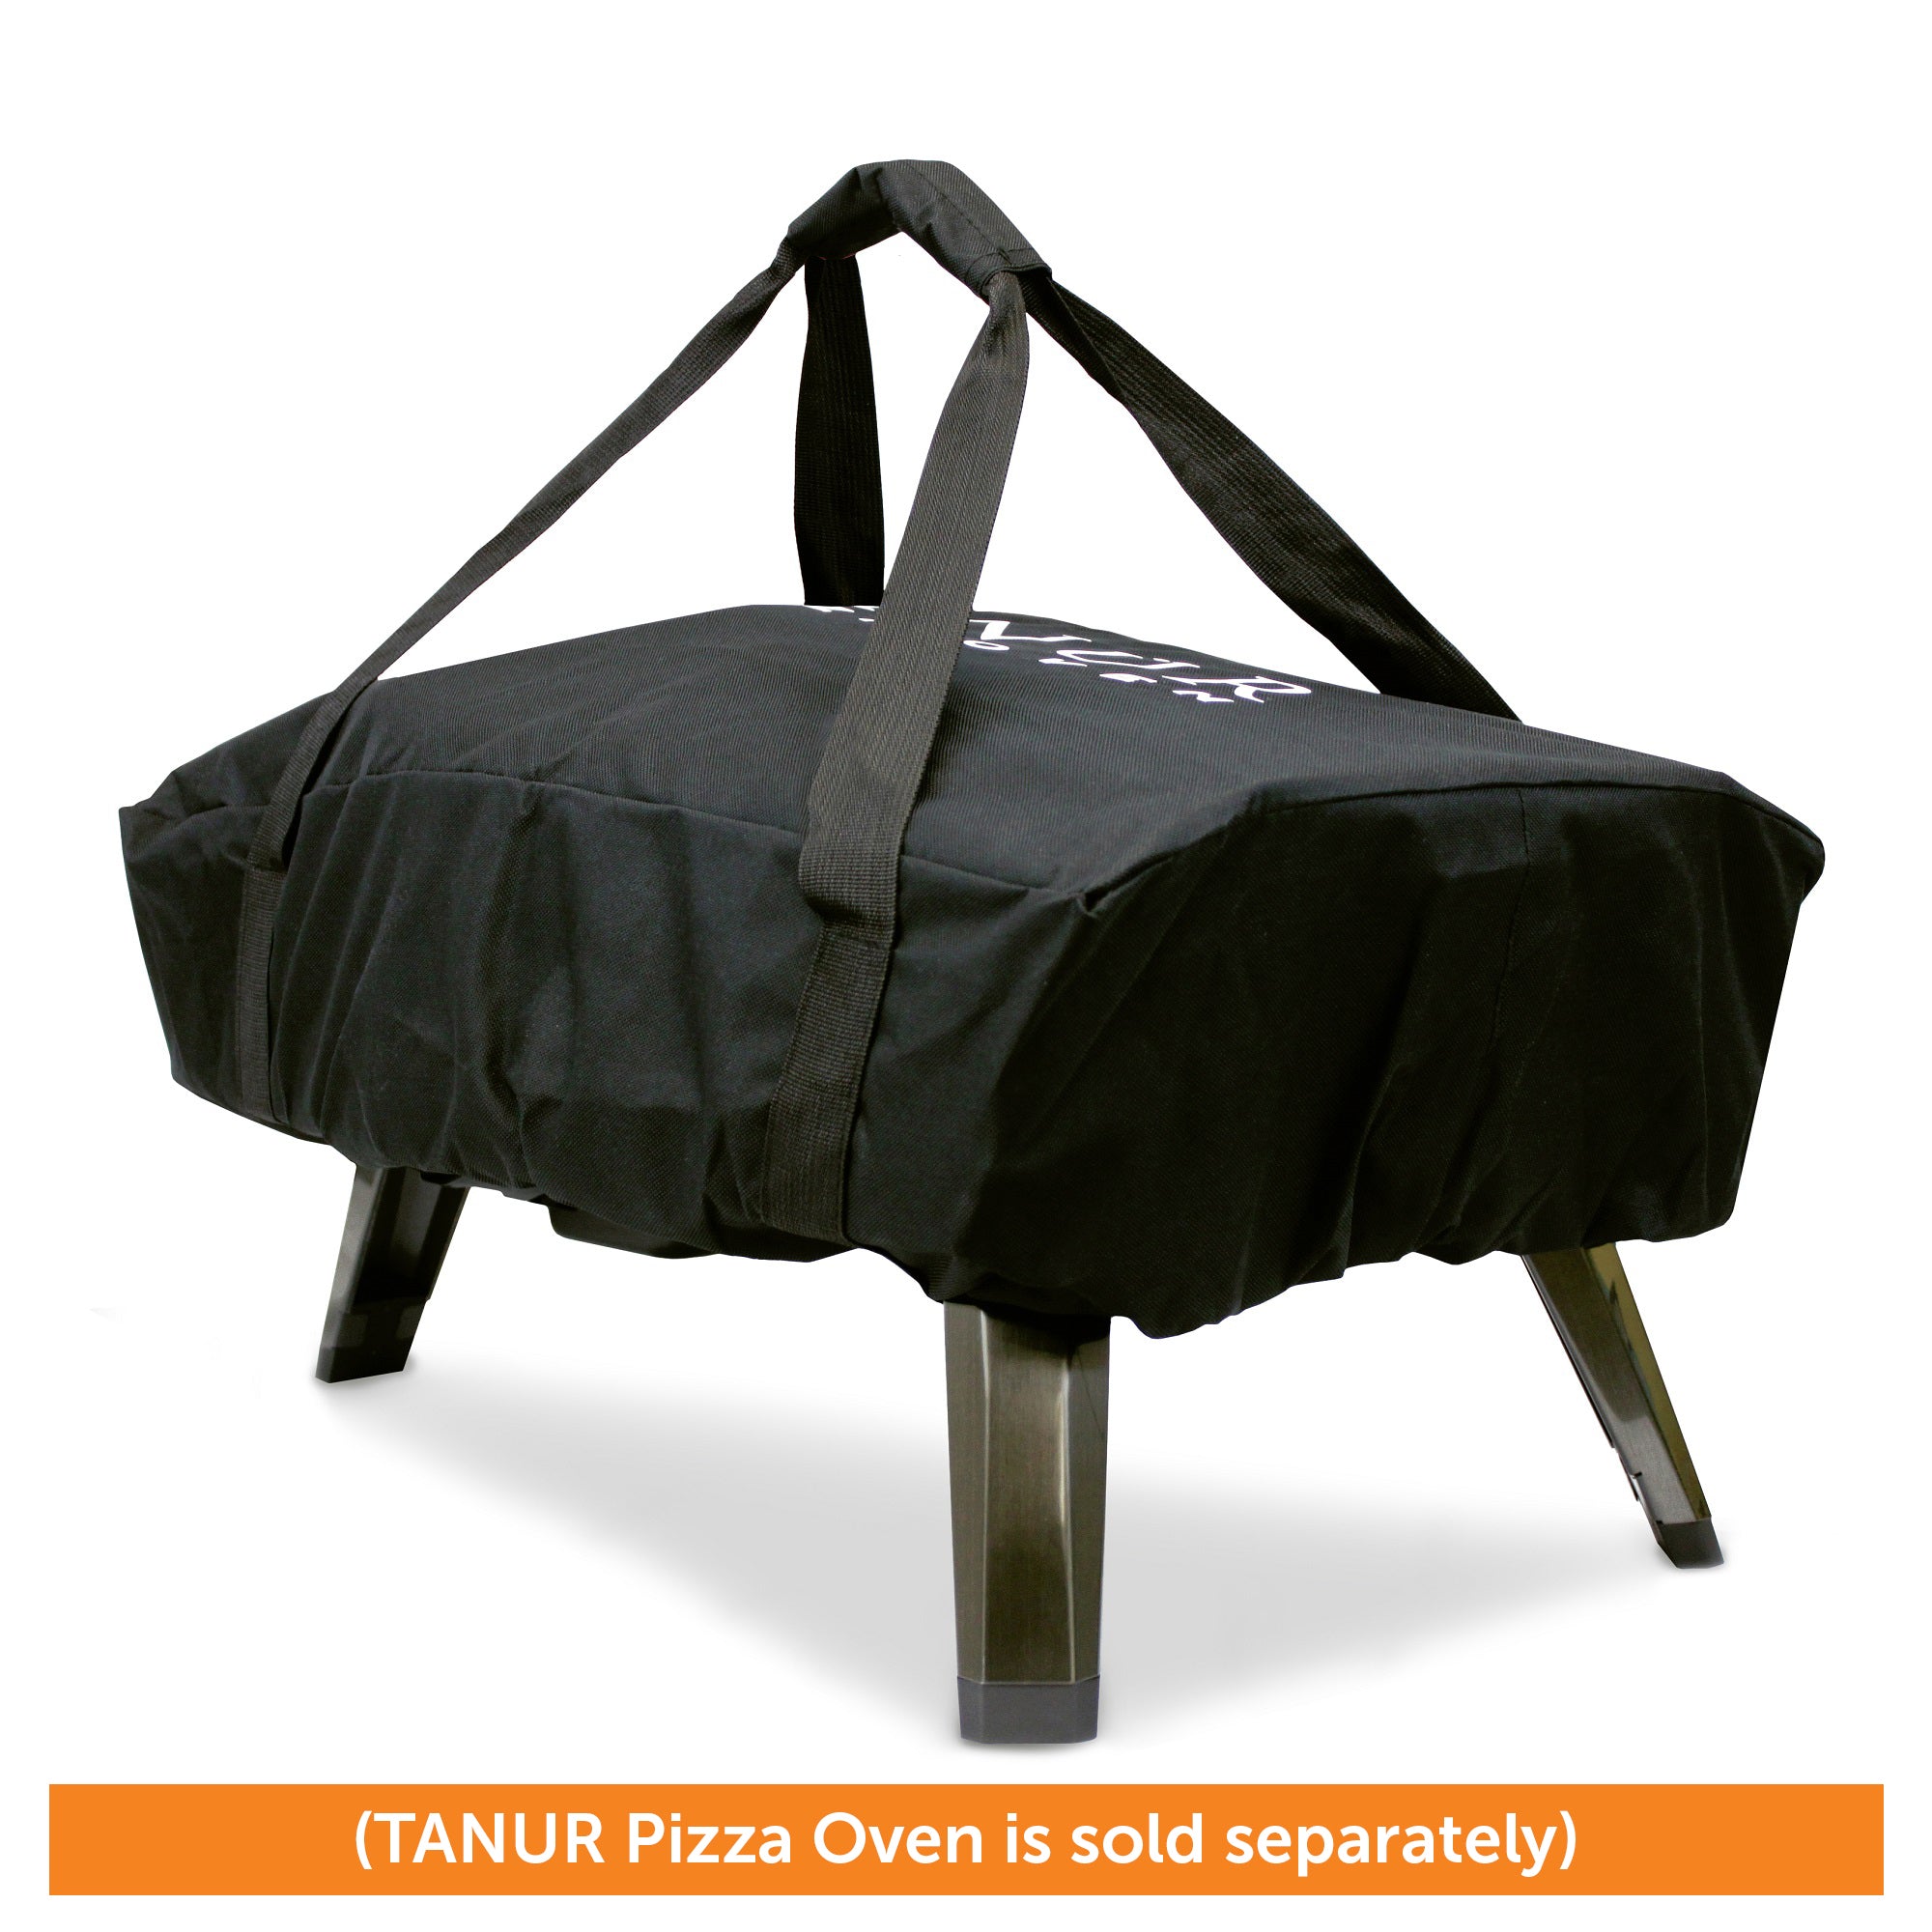 Flame King Propane 12-inch Tanur Pizza Oven Carry Cover Bag